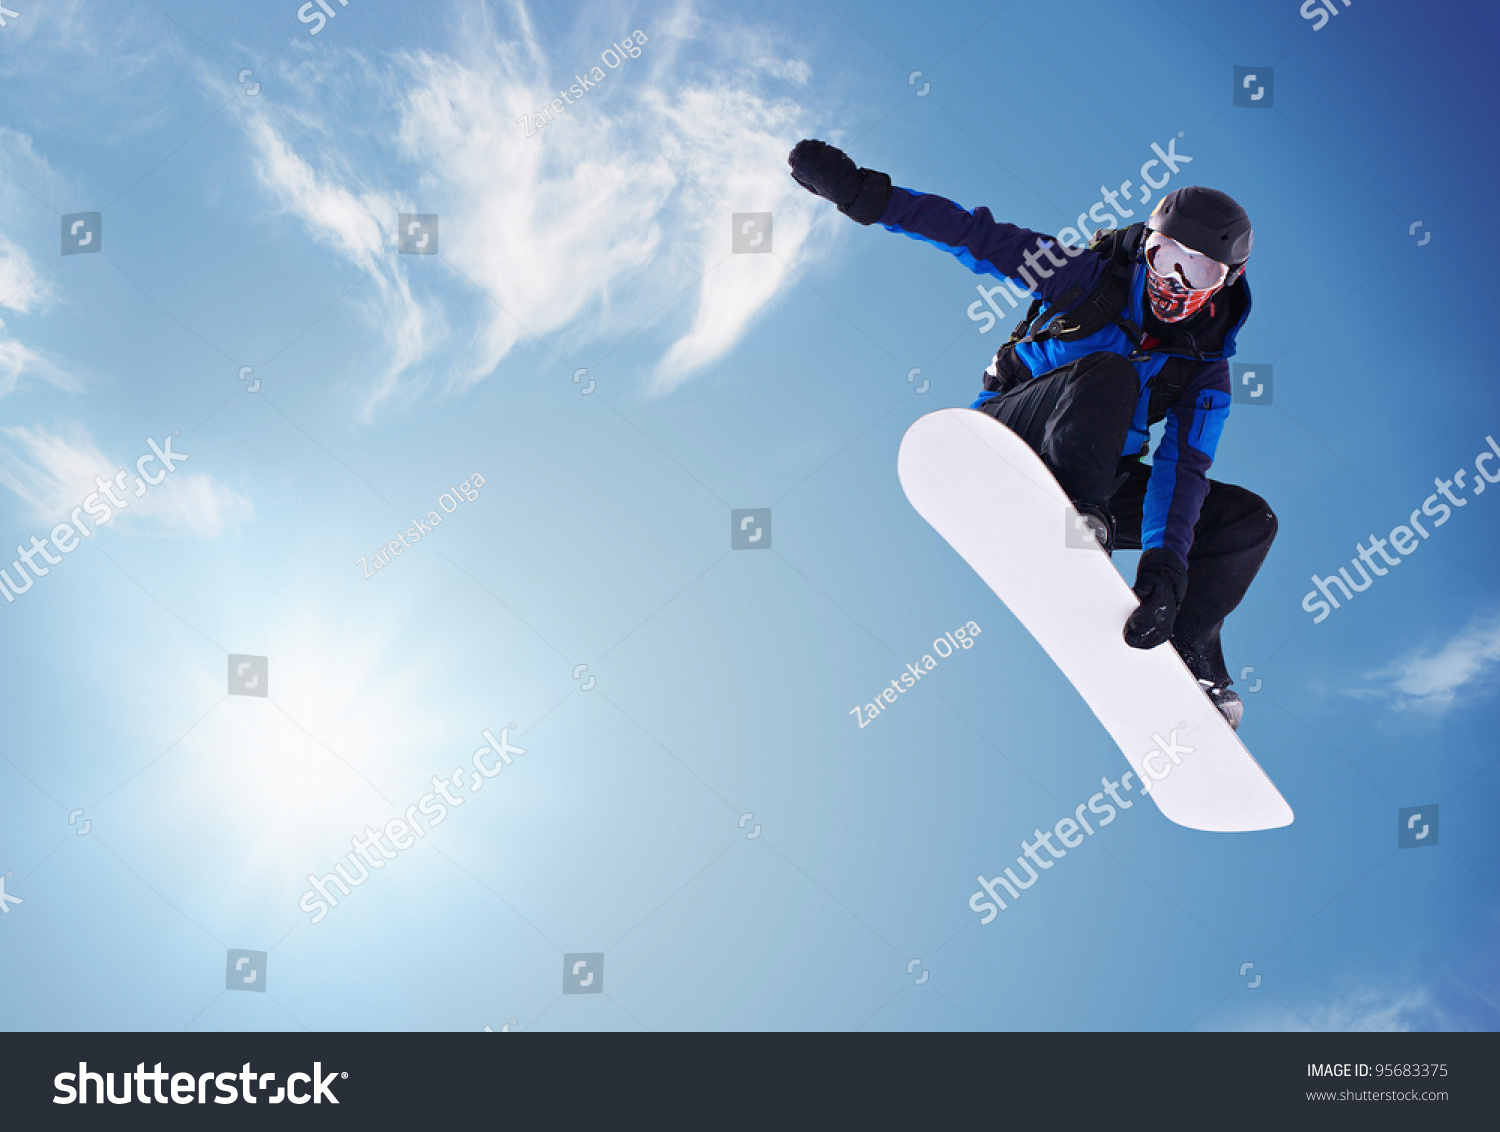 Snowboarder jumping against blue sky #95683375